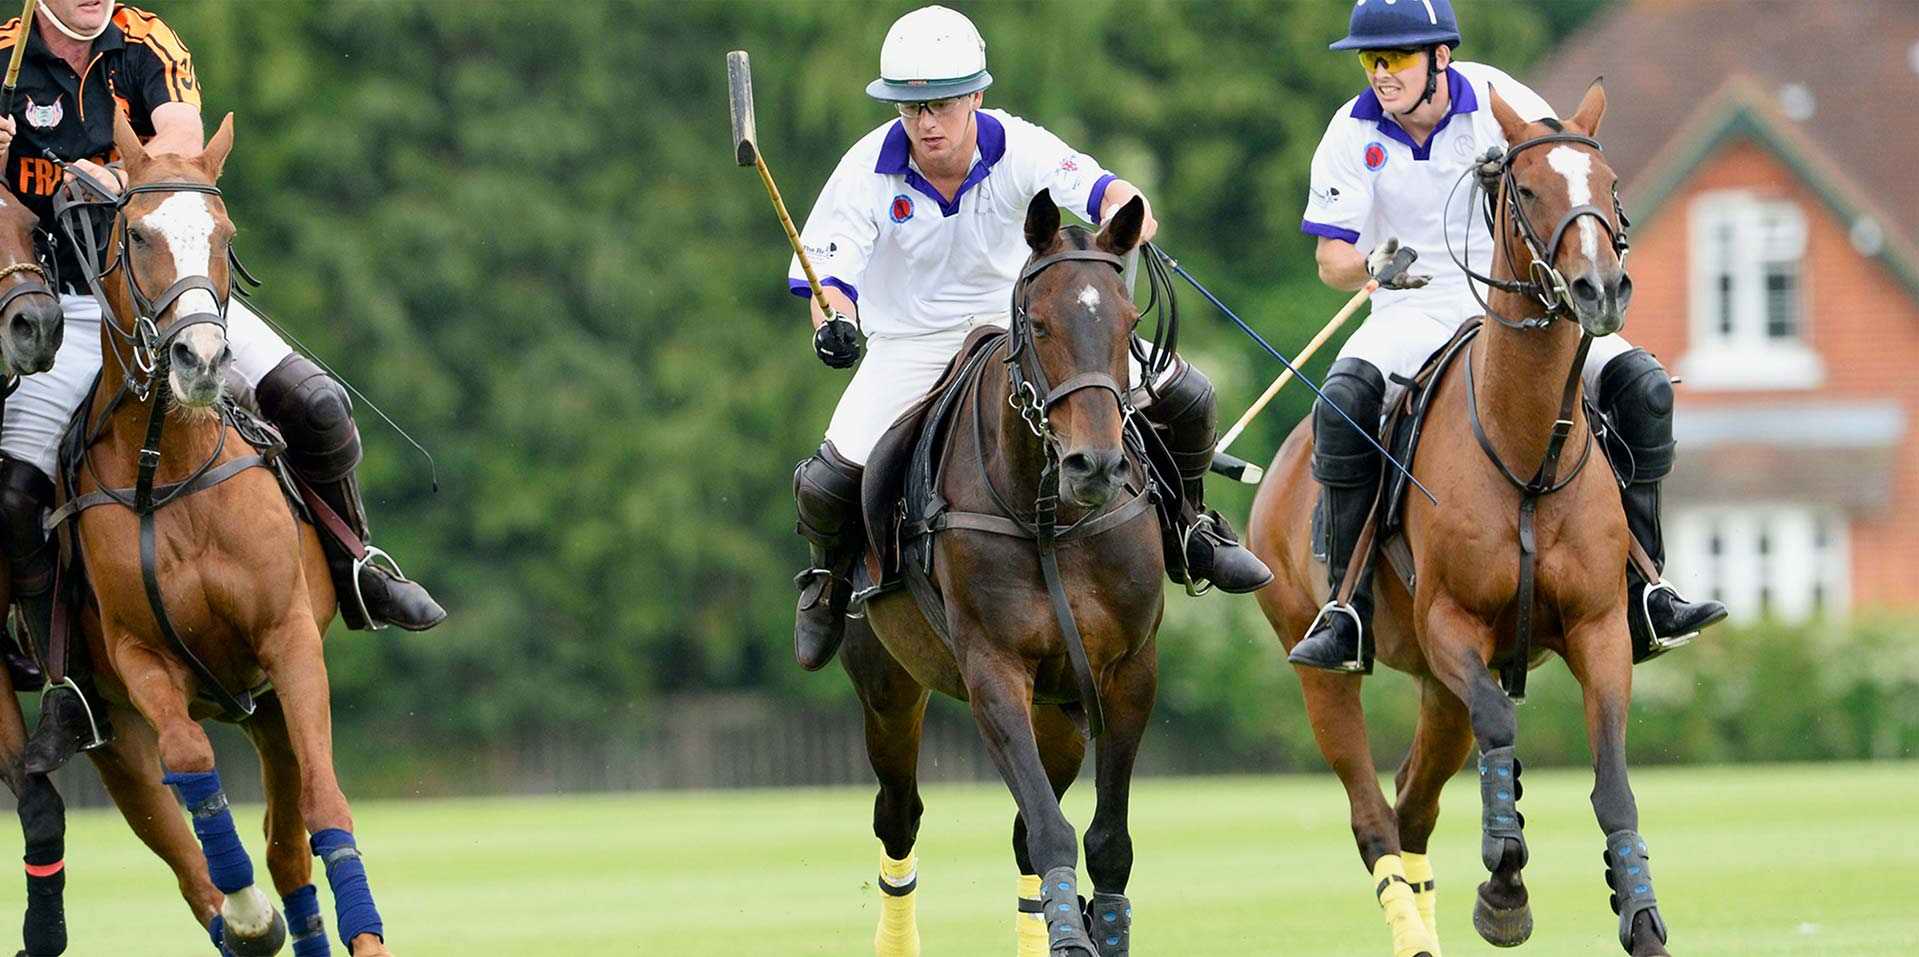 THE HACKETT INTER REGIMENT polo this week lapolo